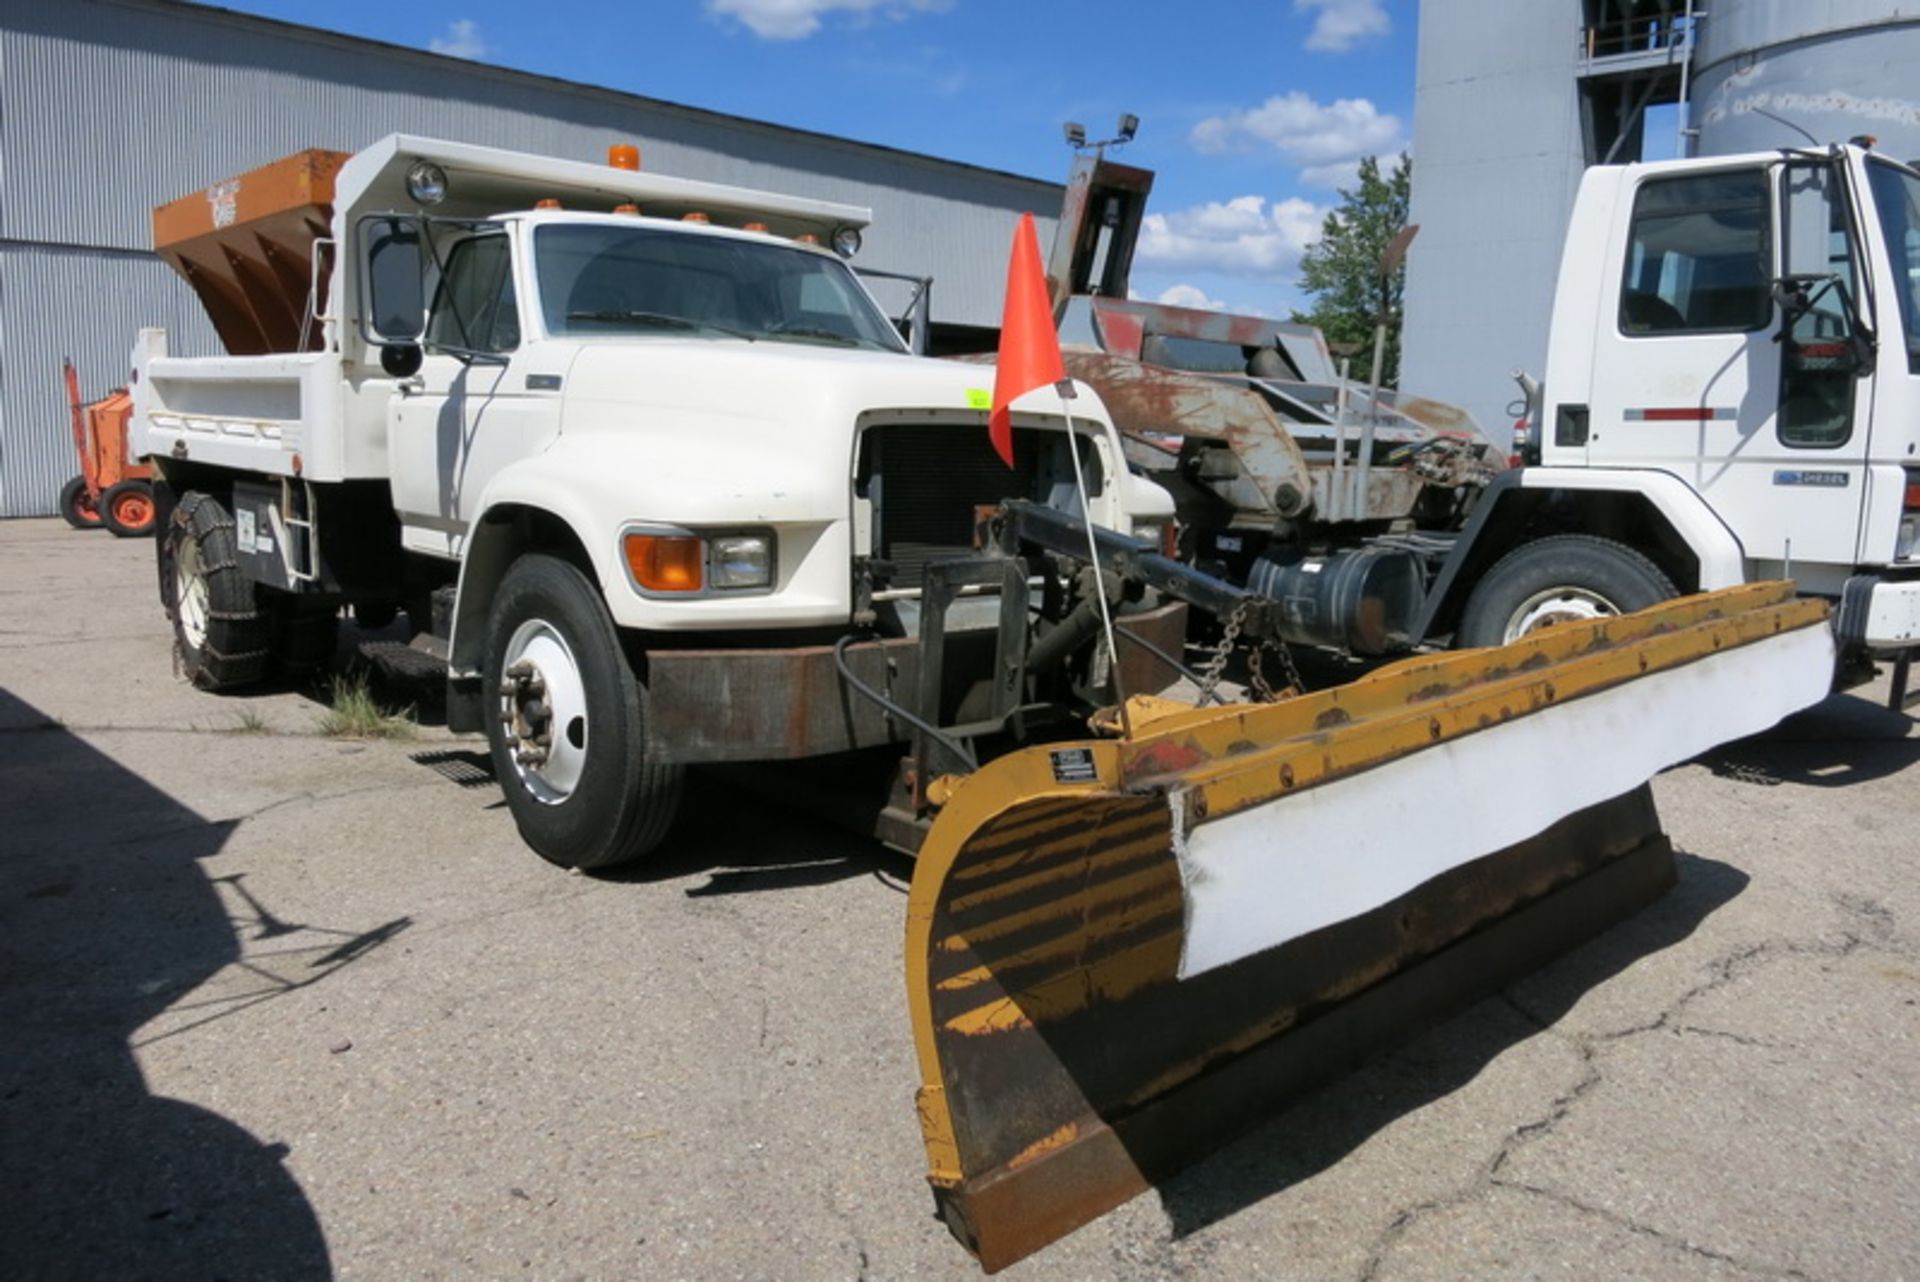 1996 Ford F Series dump truck, single axle, 24,500 GVWR, diesel engine, automatic transmission, 87,